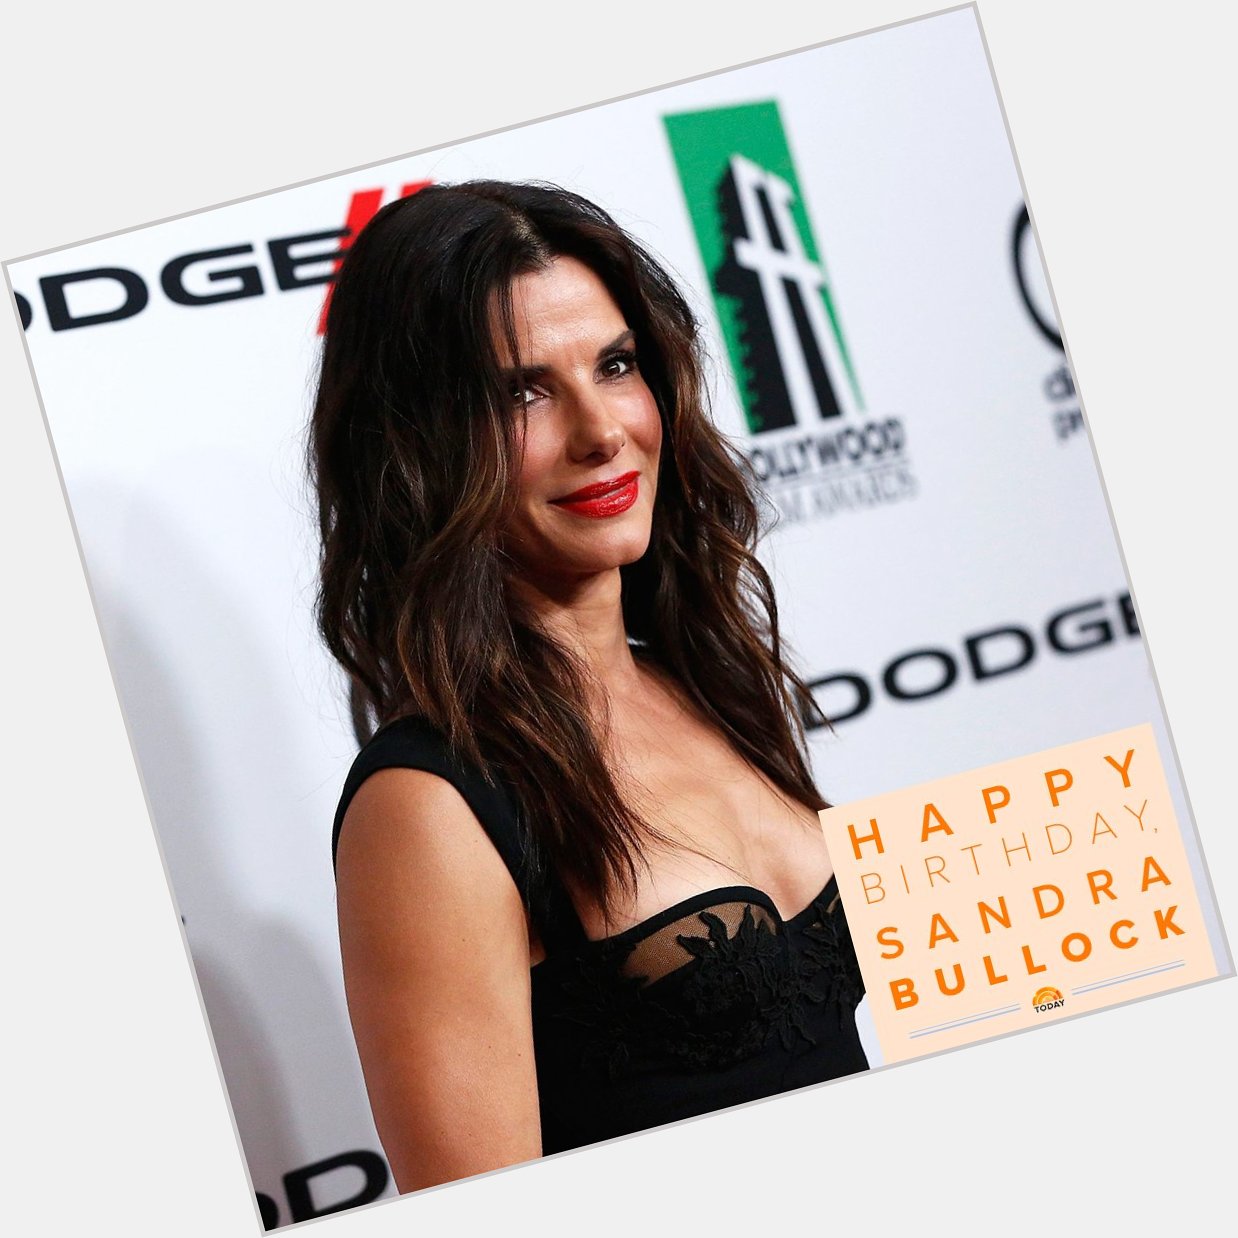 Happy birthday to one of our favorite guests Sandra Bullock! 